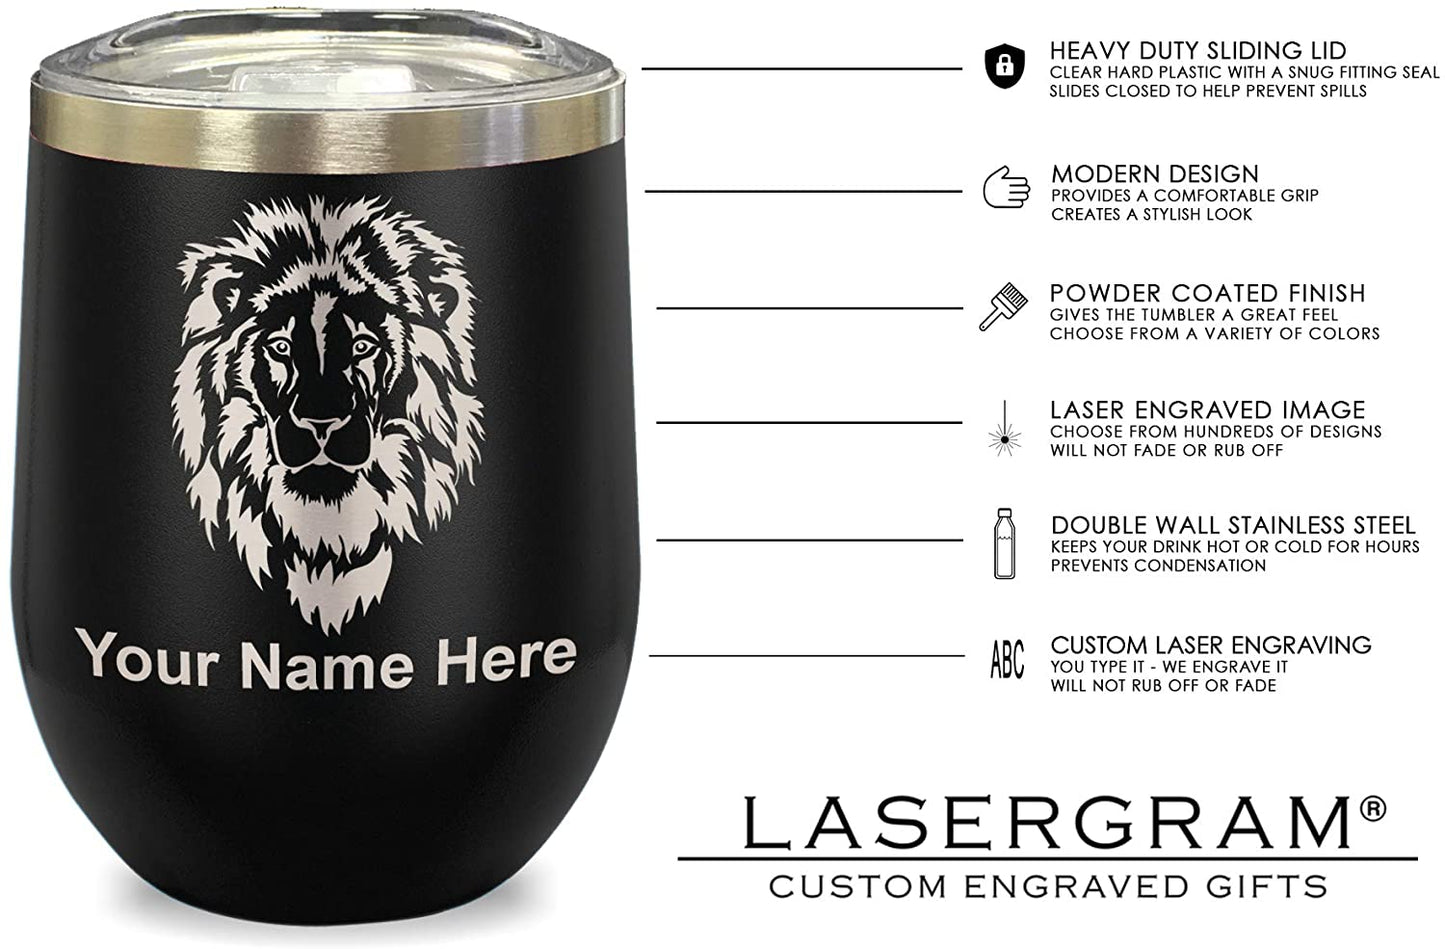 LaserGram Double Wall Stainless Steel Wine Glass, Royal Flush Poker Cards, Personalized Engraving Included